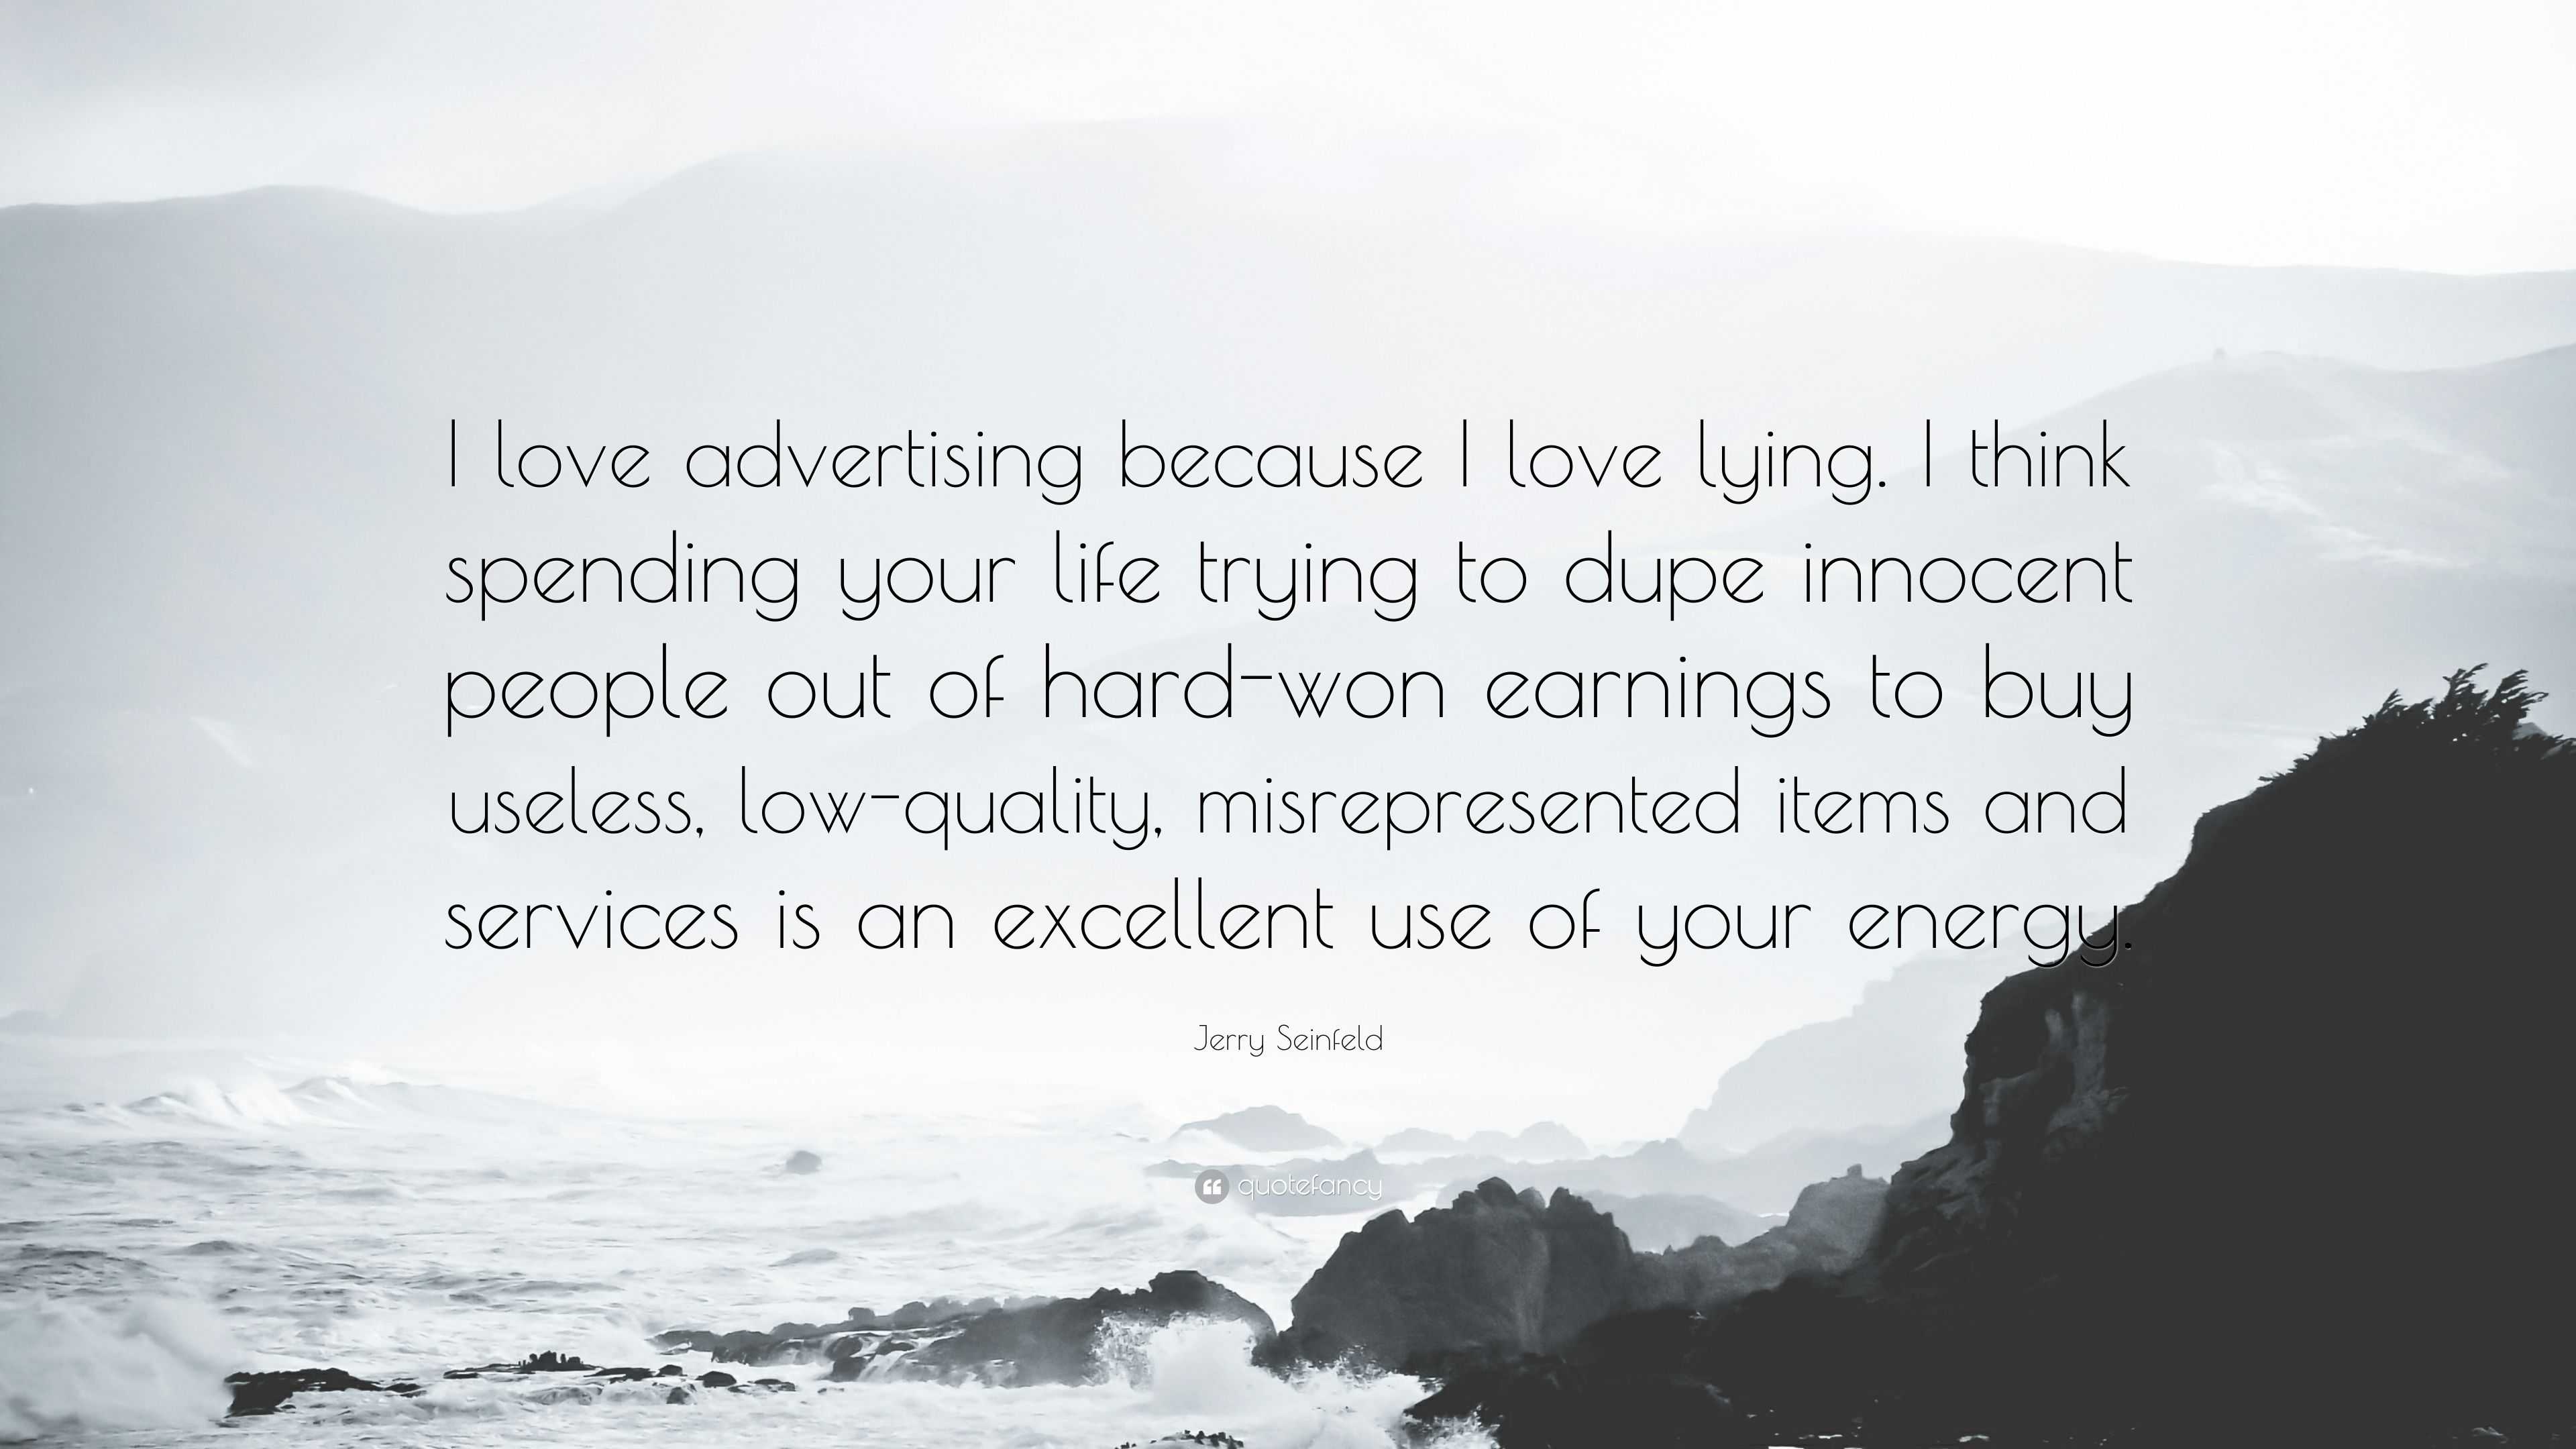 Jerry Seinfeld Quote “I love advertising because I love lying I think spending